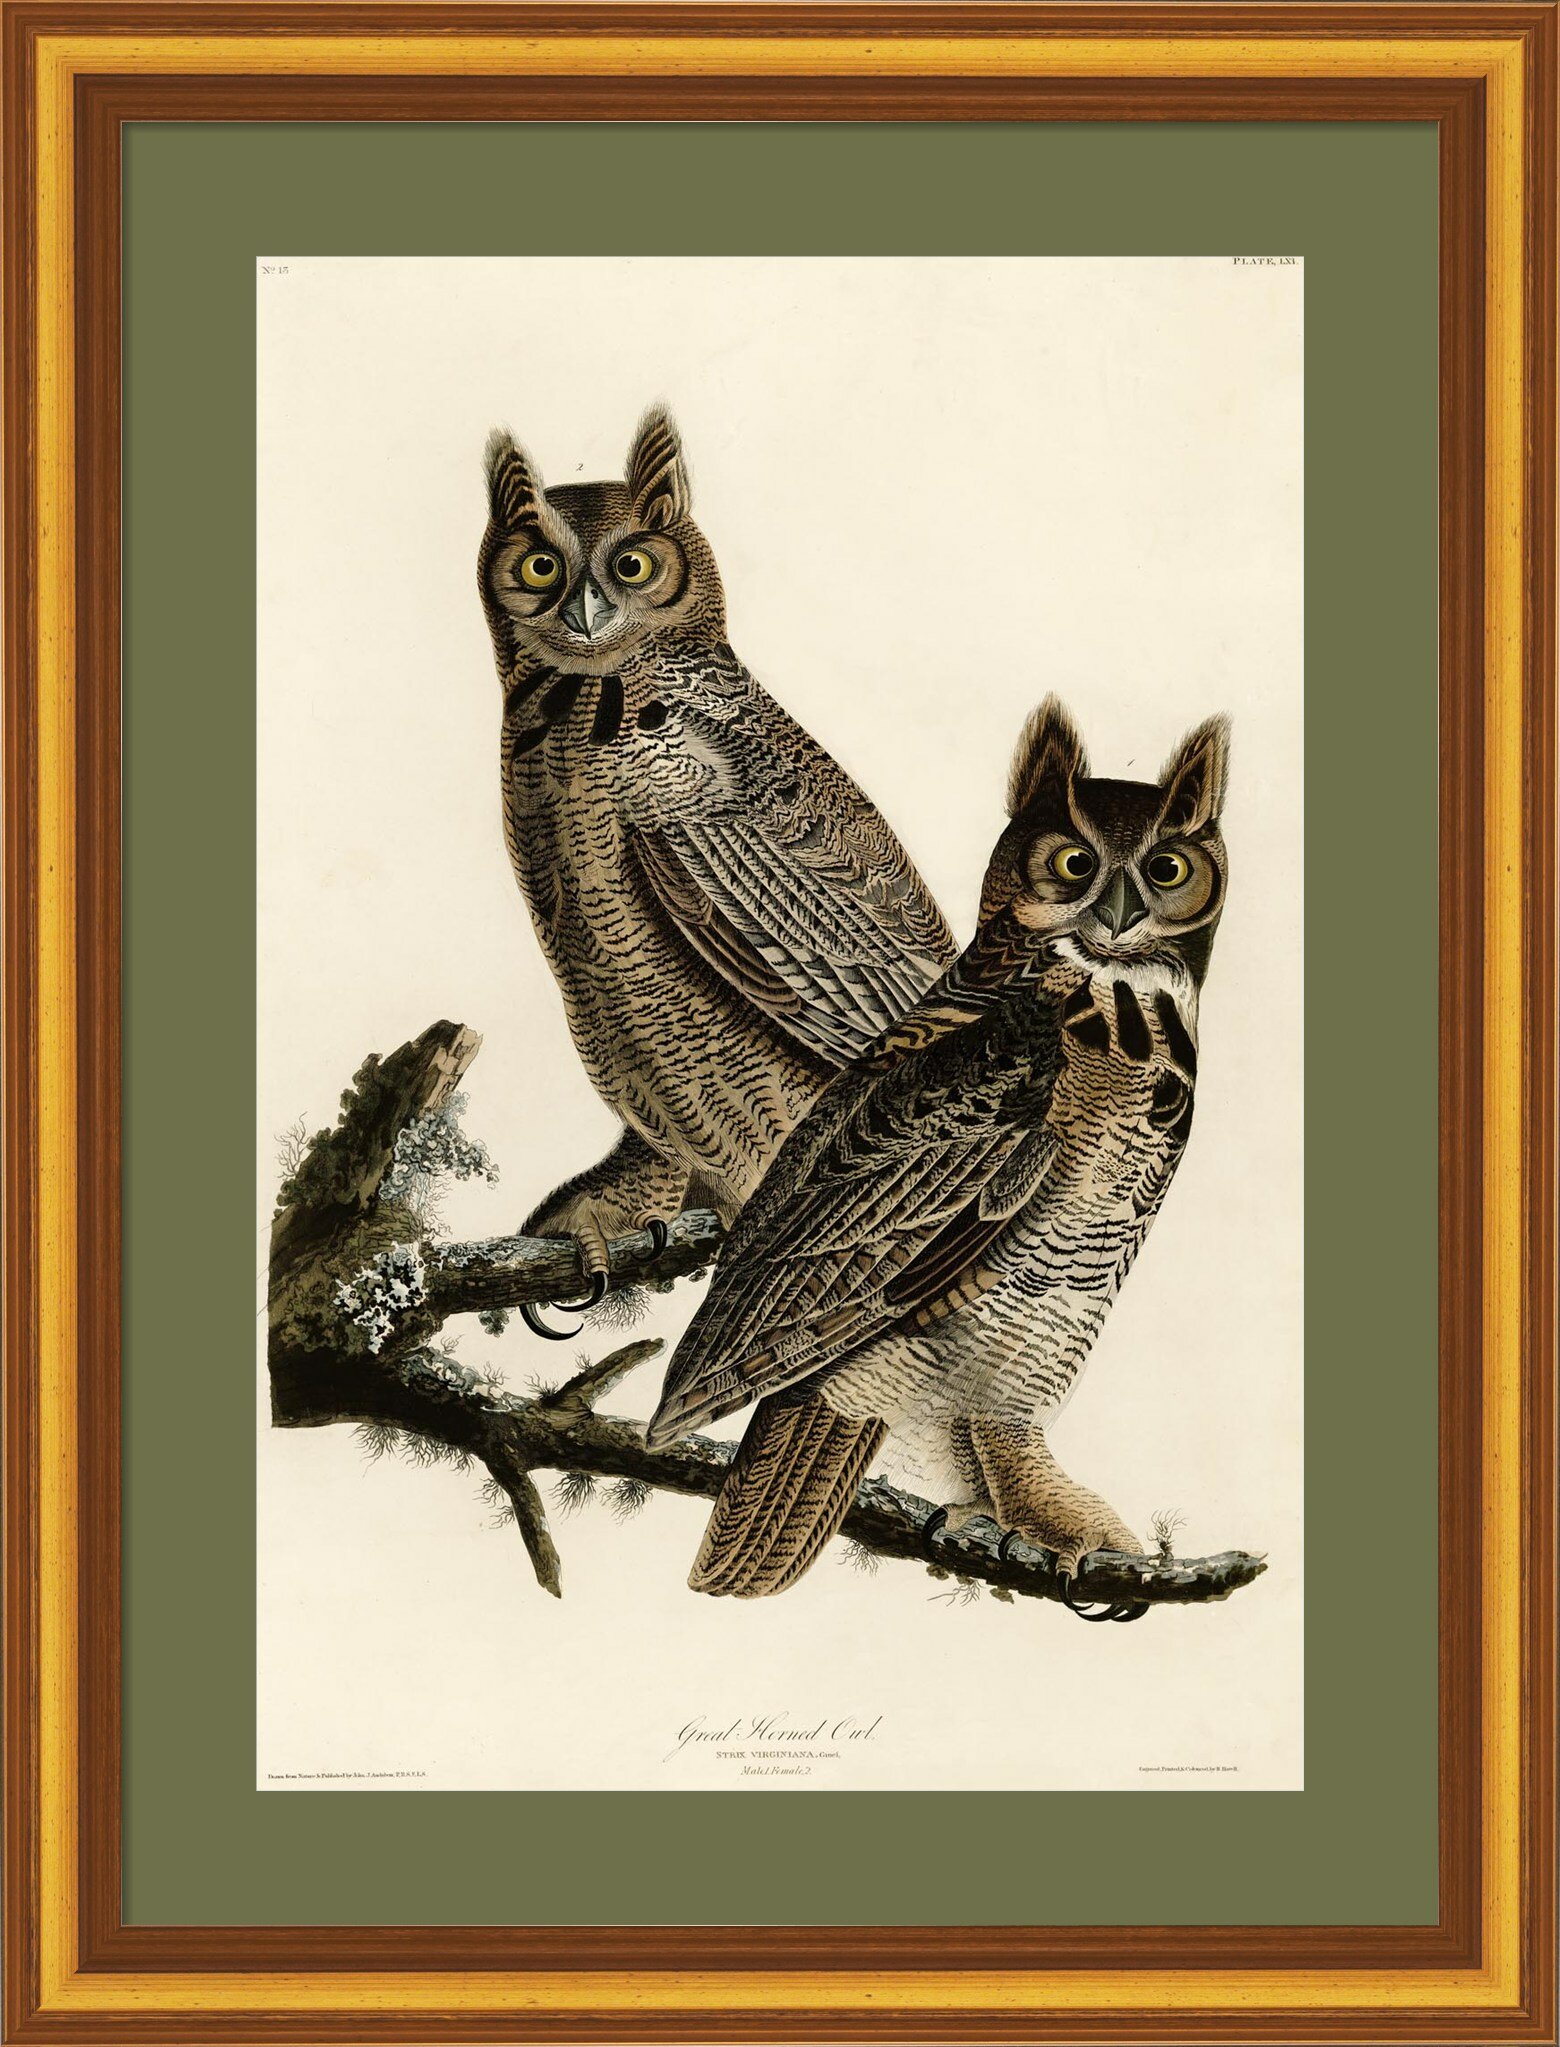 Great horned owl drawing brown owl drawing owl illustration matted owl art